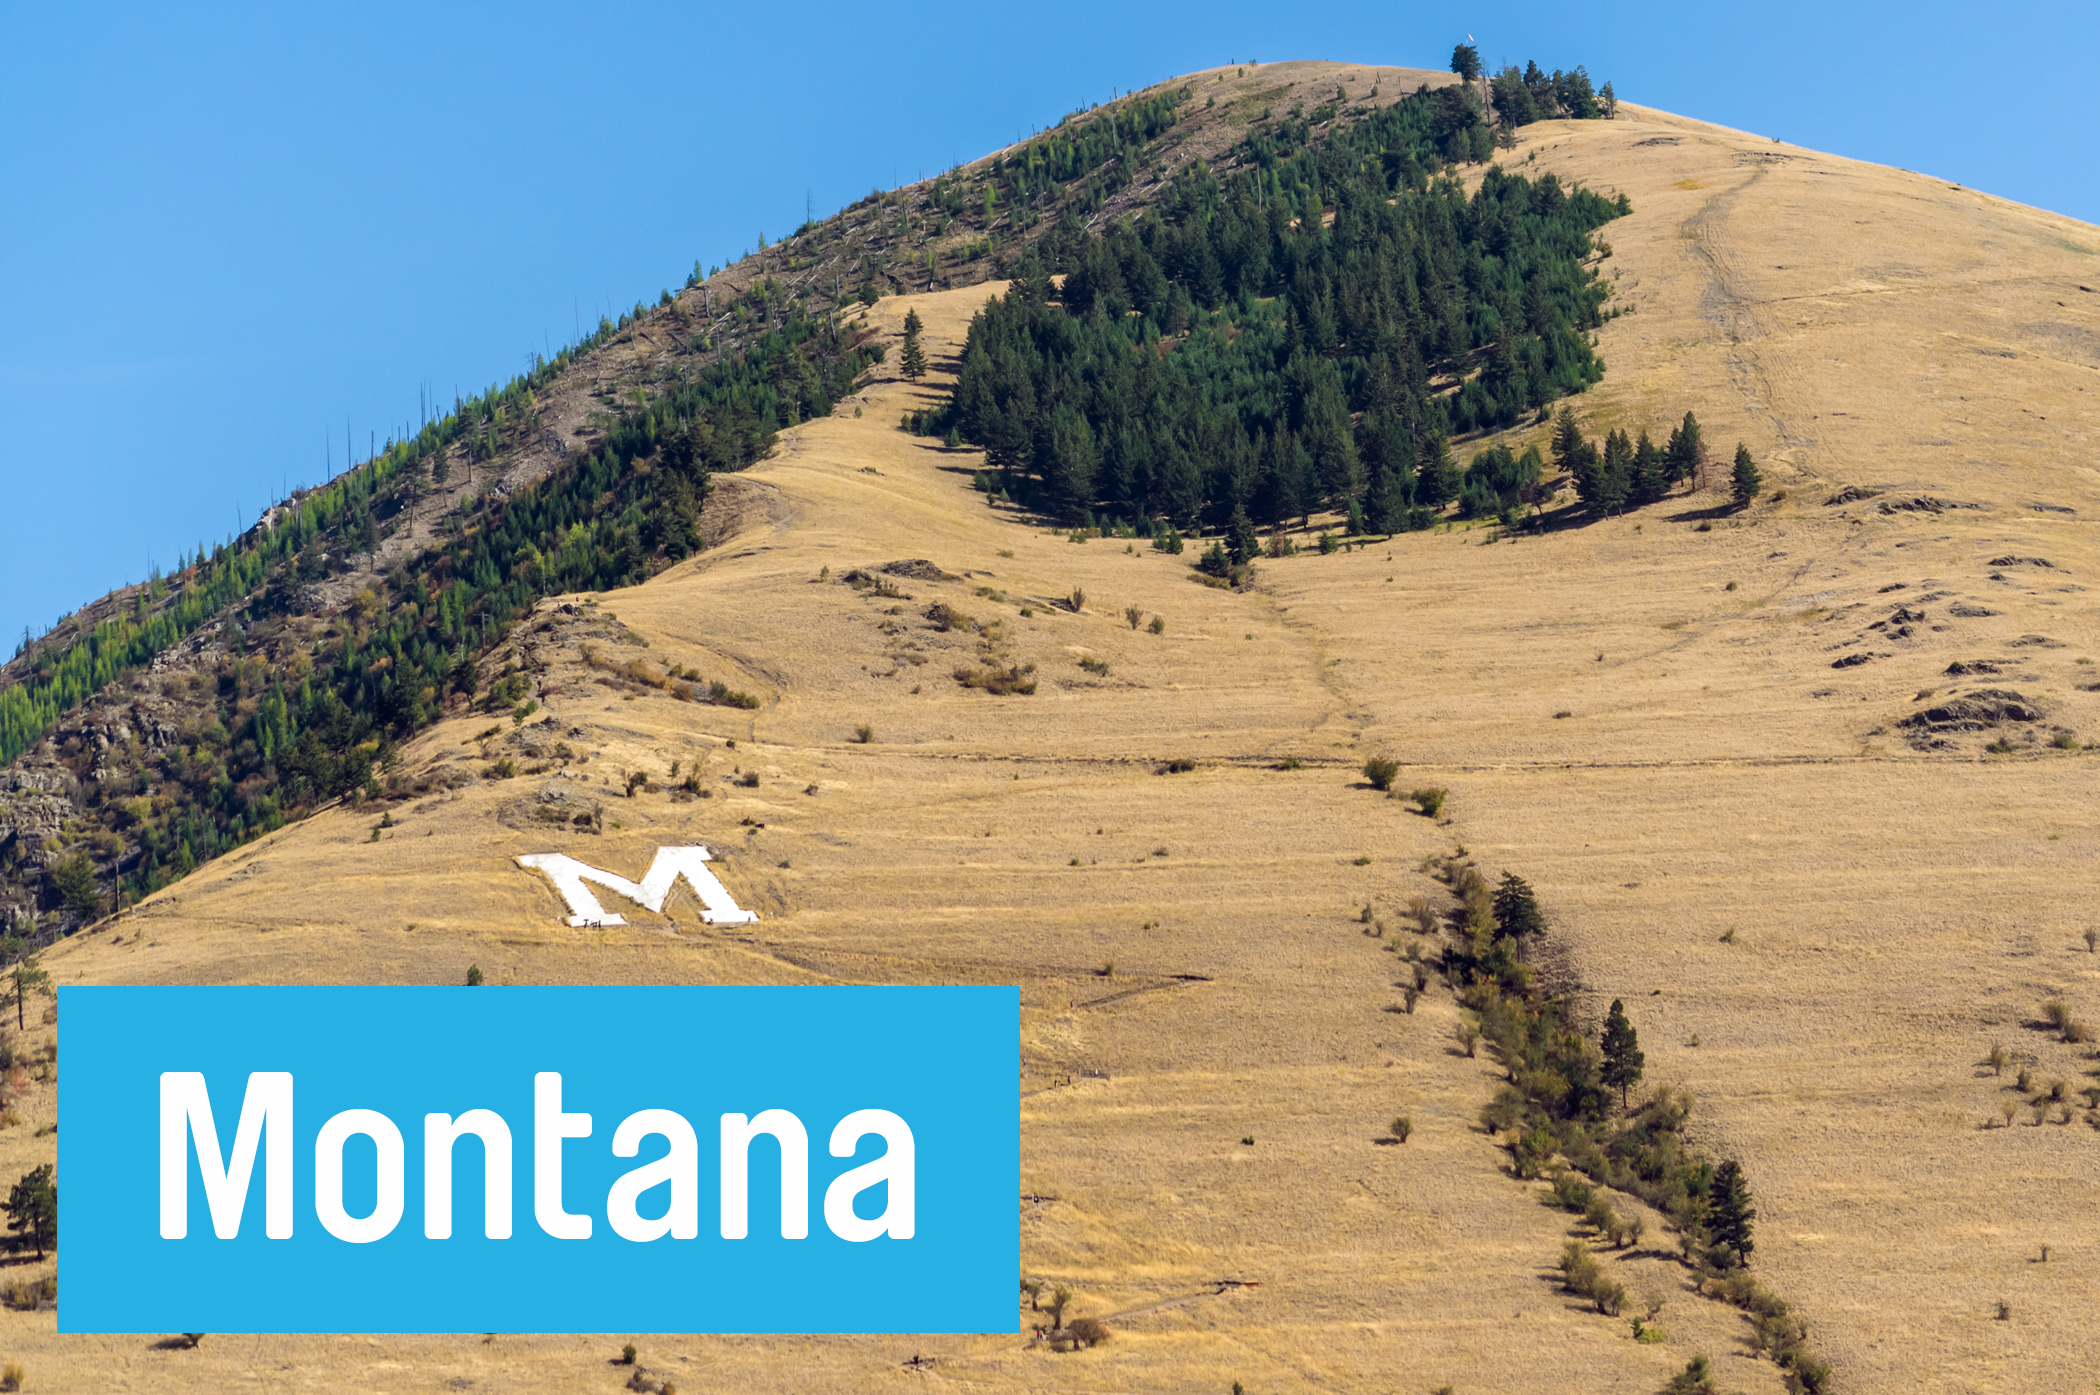 Climb 3/4 of a mile in switchbacks up Mount Sentinel and get a hummingbird's eye view of Missoula’s iconic <a href="http://destinationmissoula.org/blog/25-things-to-do/hike-m/" target="_blank">"M"</a>, built by University of Montana students in 1908. It’s best to go at sunrise or sunset, when the surrounding mountains and valley below are bathed in surreal, pink light.